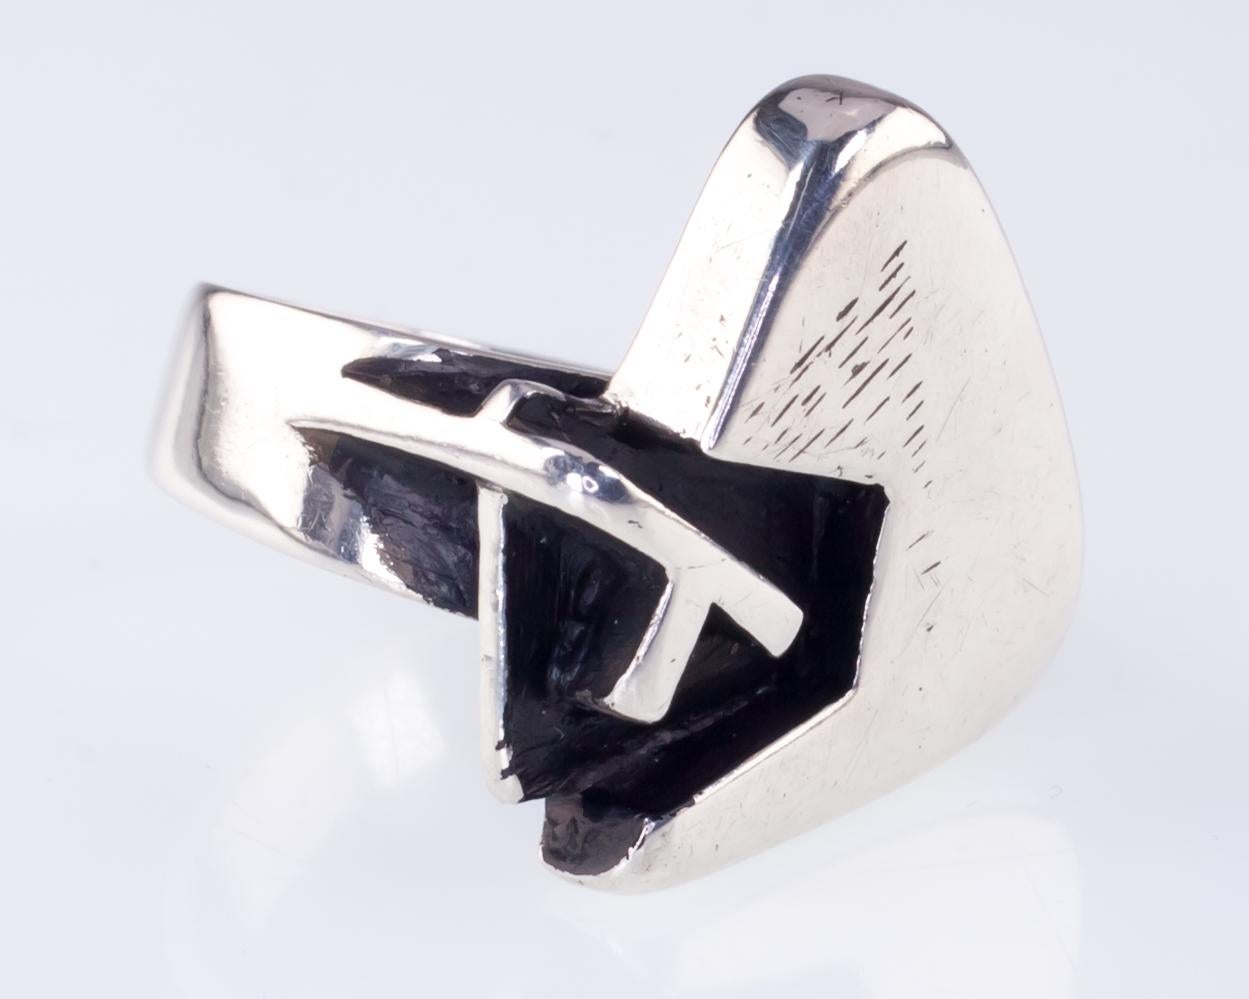 Gorgeous Sterling Silver Ring with Modernist Design
Designed by Margaret de Patta, credited as the founder of the Modernist studio jewelry movement
Signed 